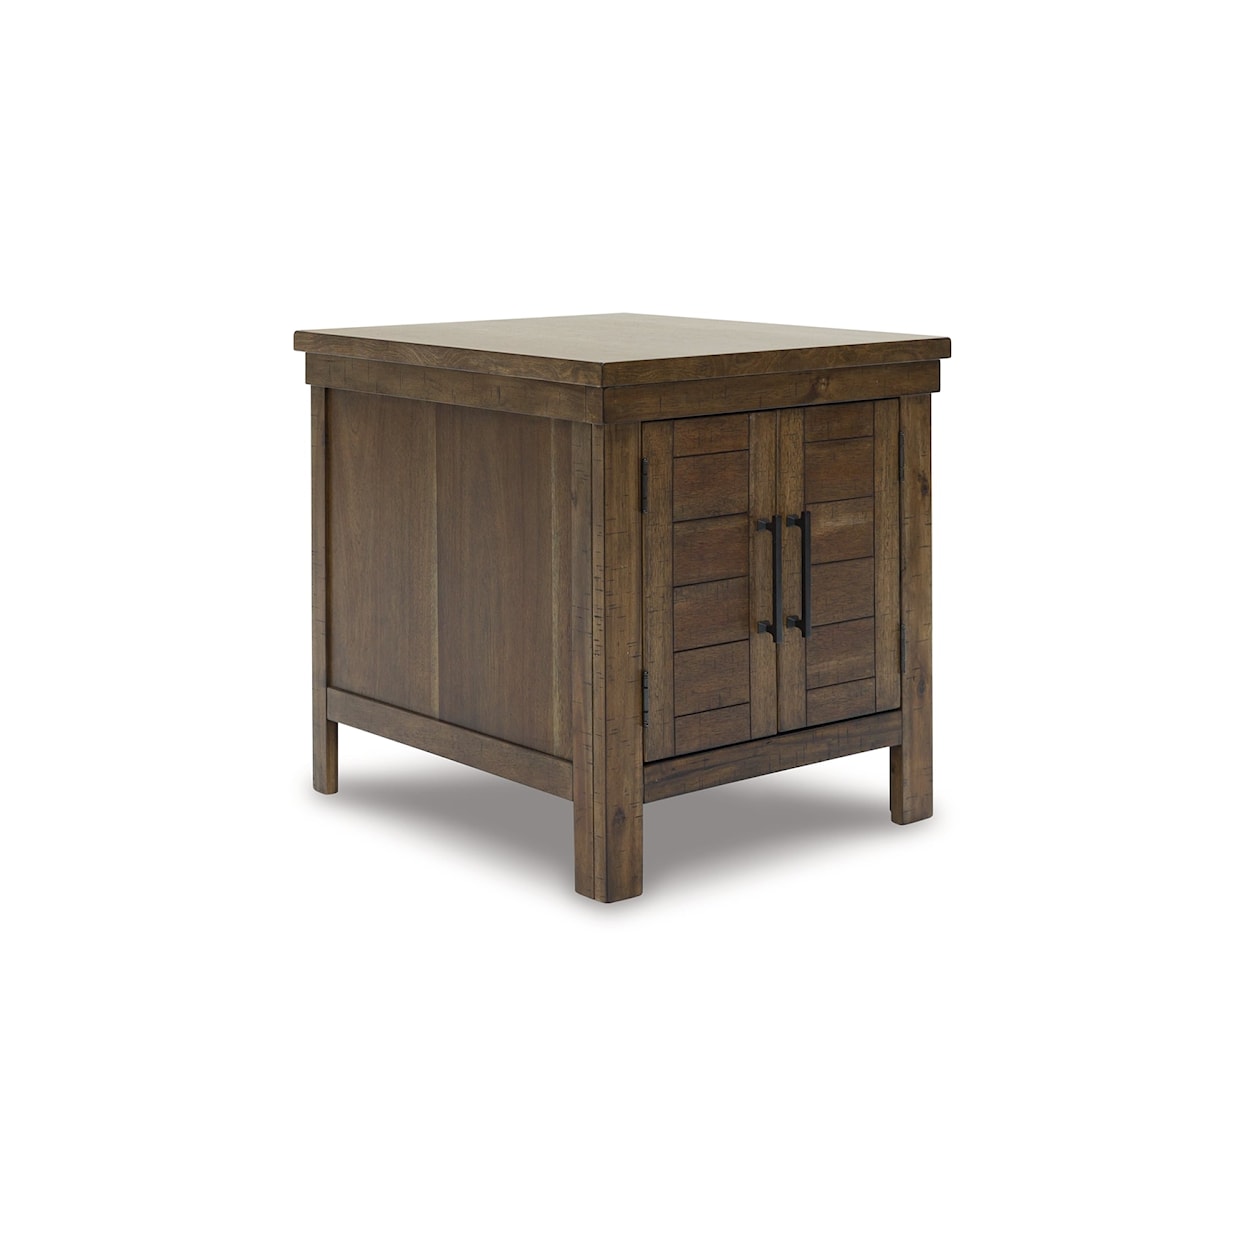 Signature Design by Ashley Furniture Moriville Rectangular End Table